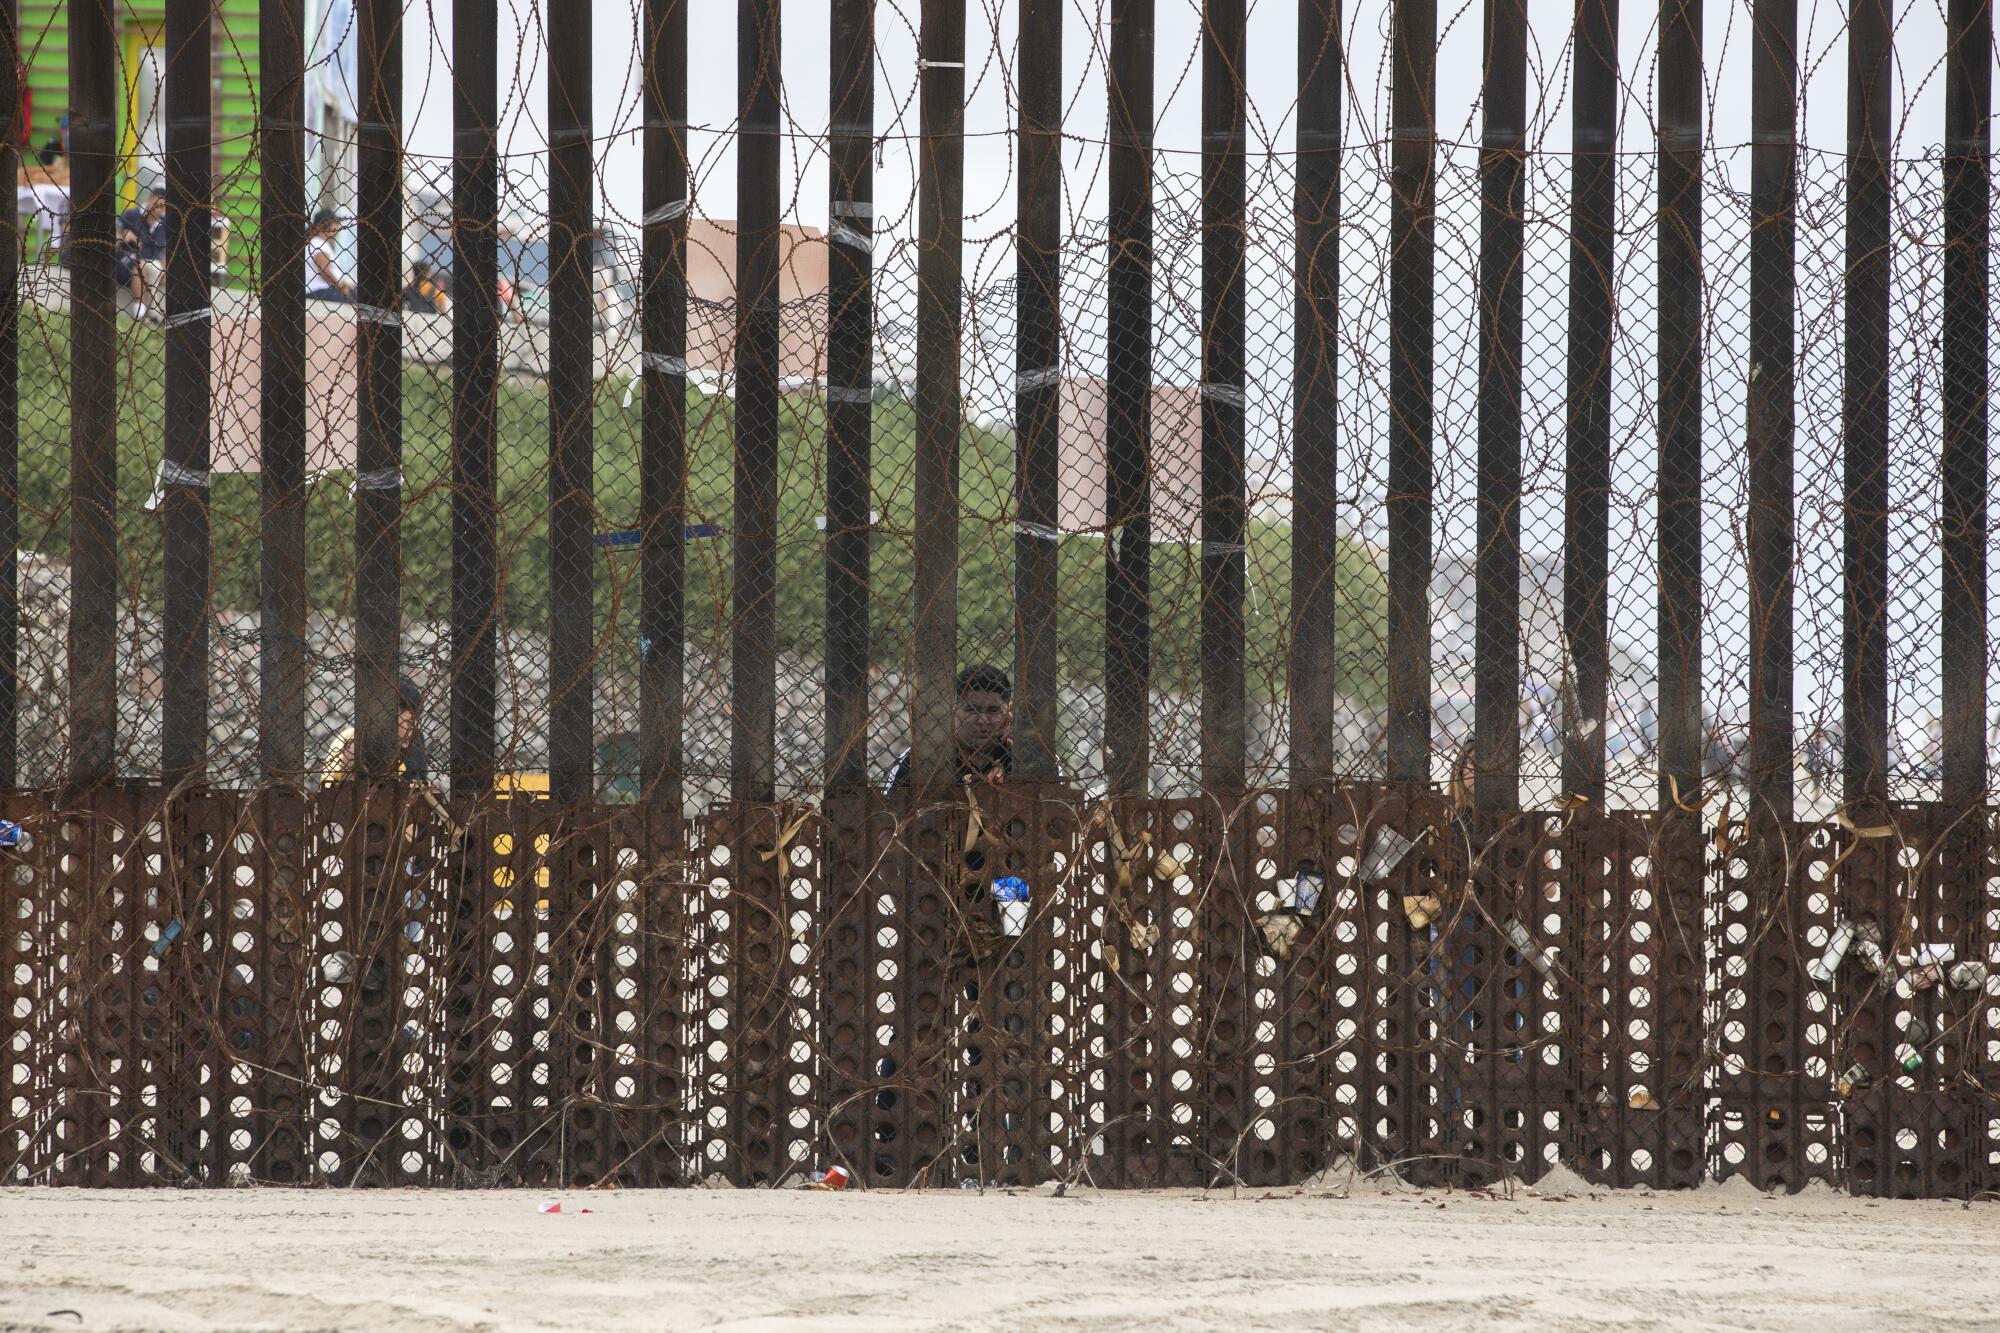 A man stands at the border fence, looking through.